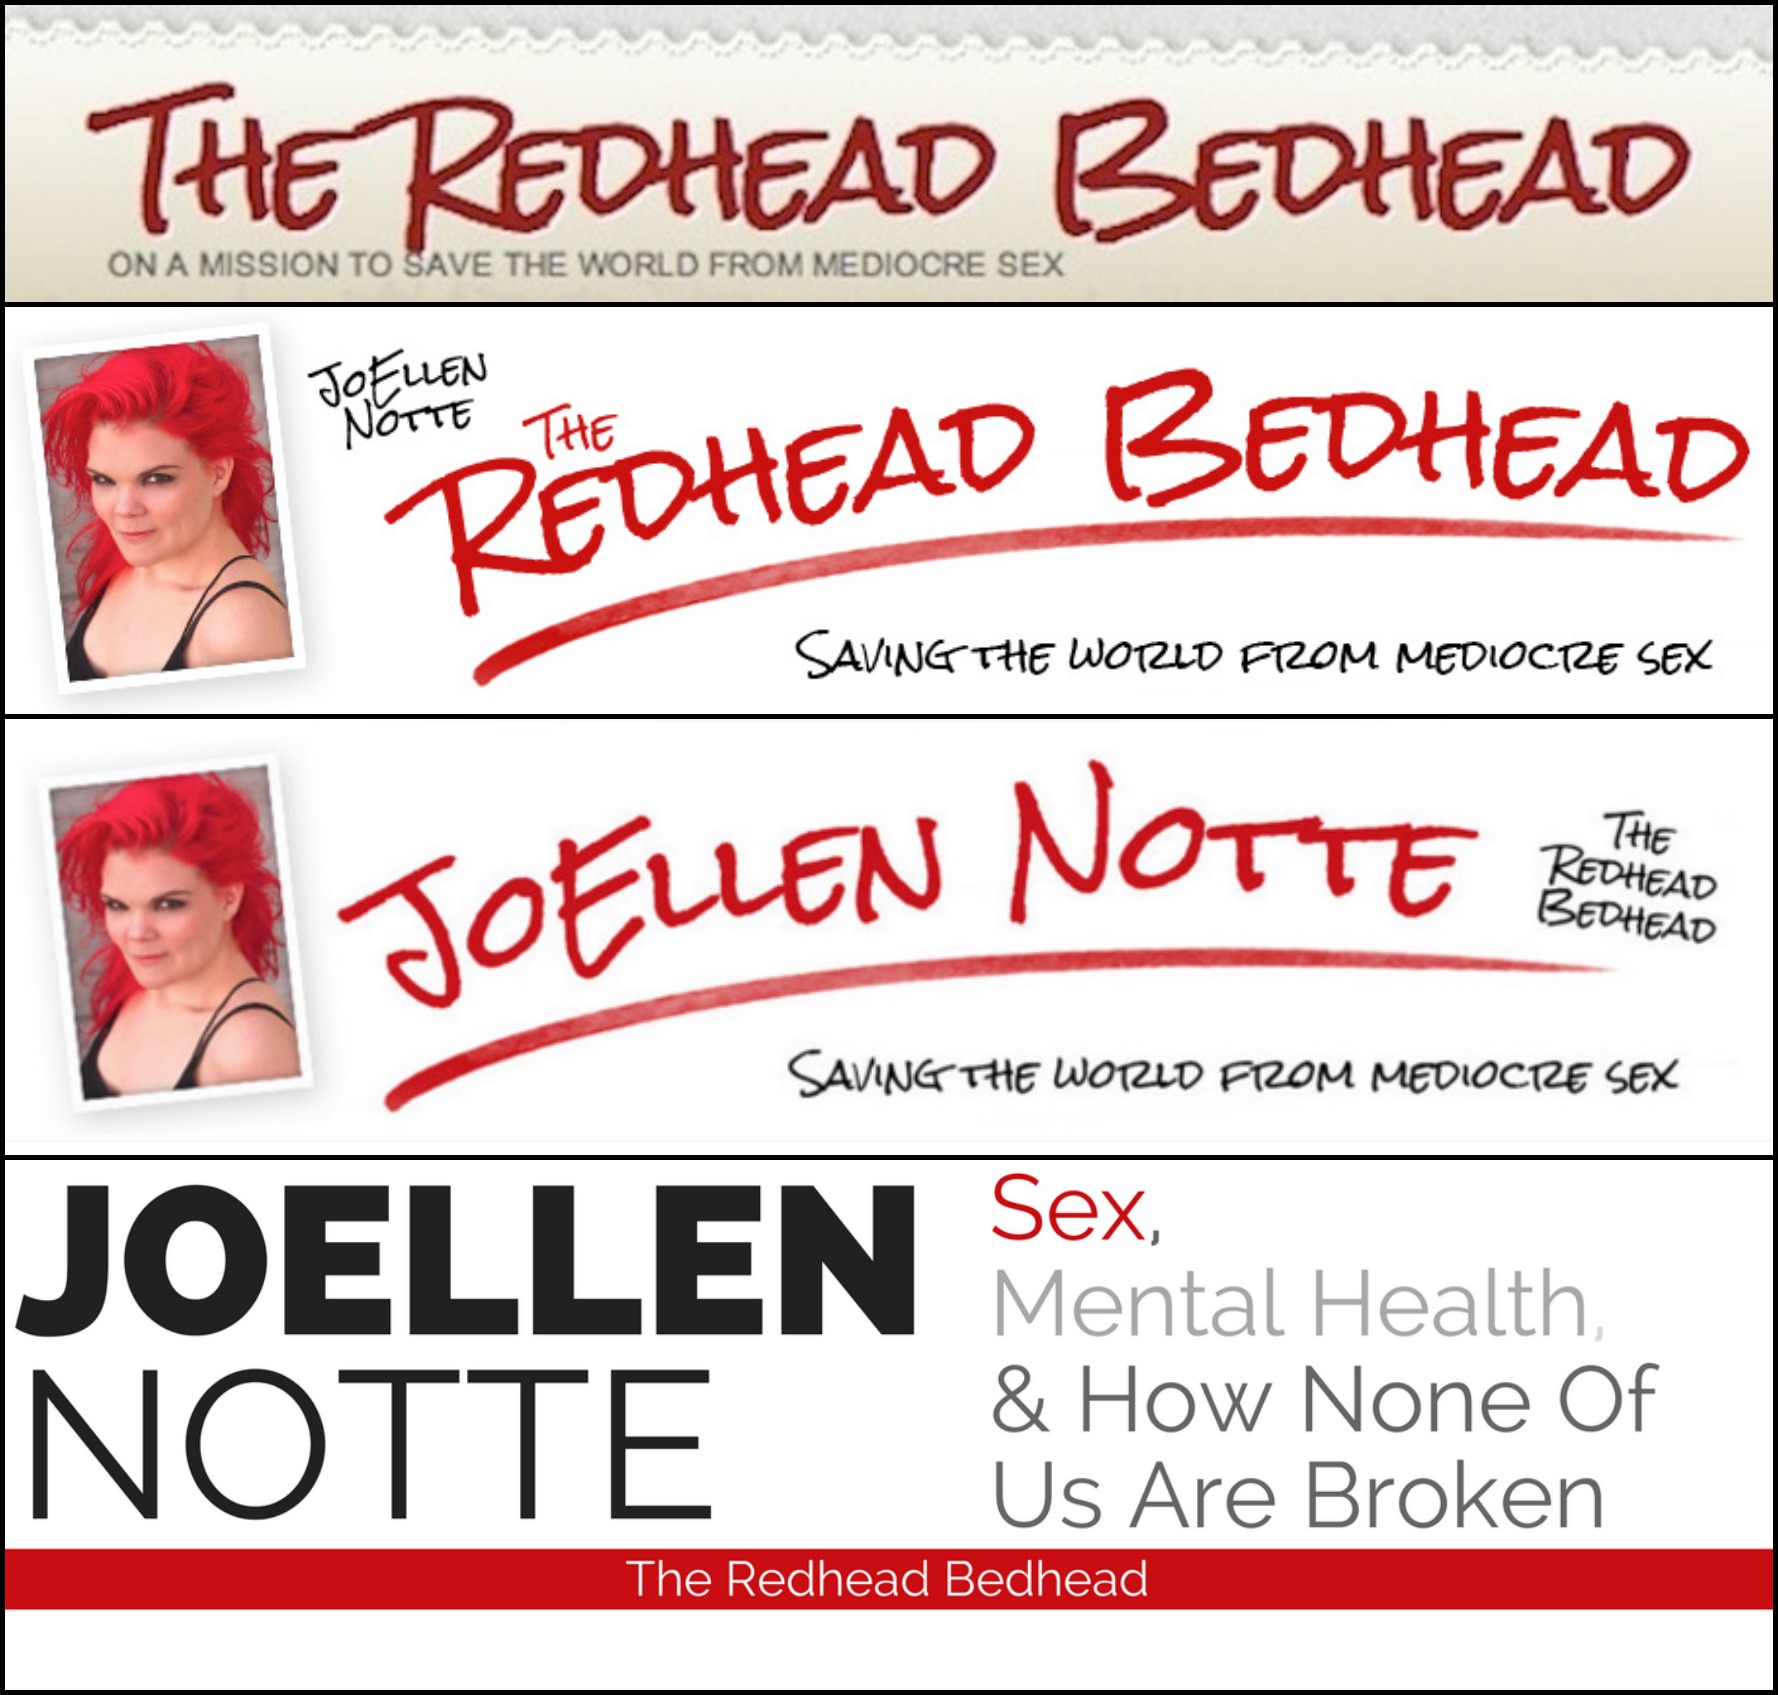 Four Redhead Bedhead website headers. First two prominently feature "The Redhead Bedhead", last two prominently feature "JoEllen Notte"